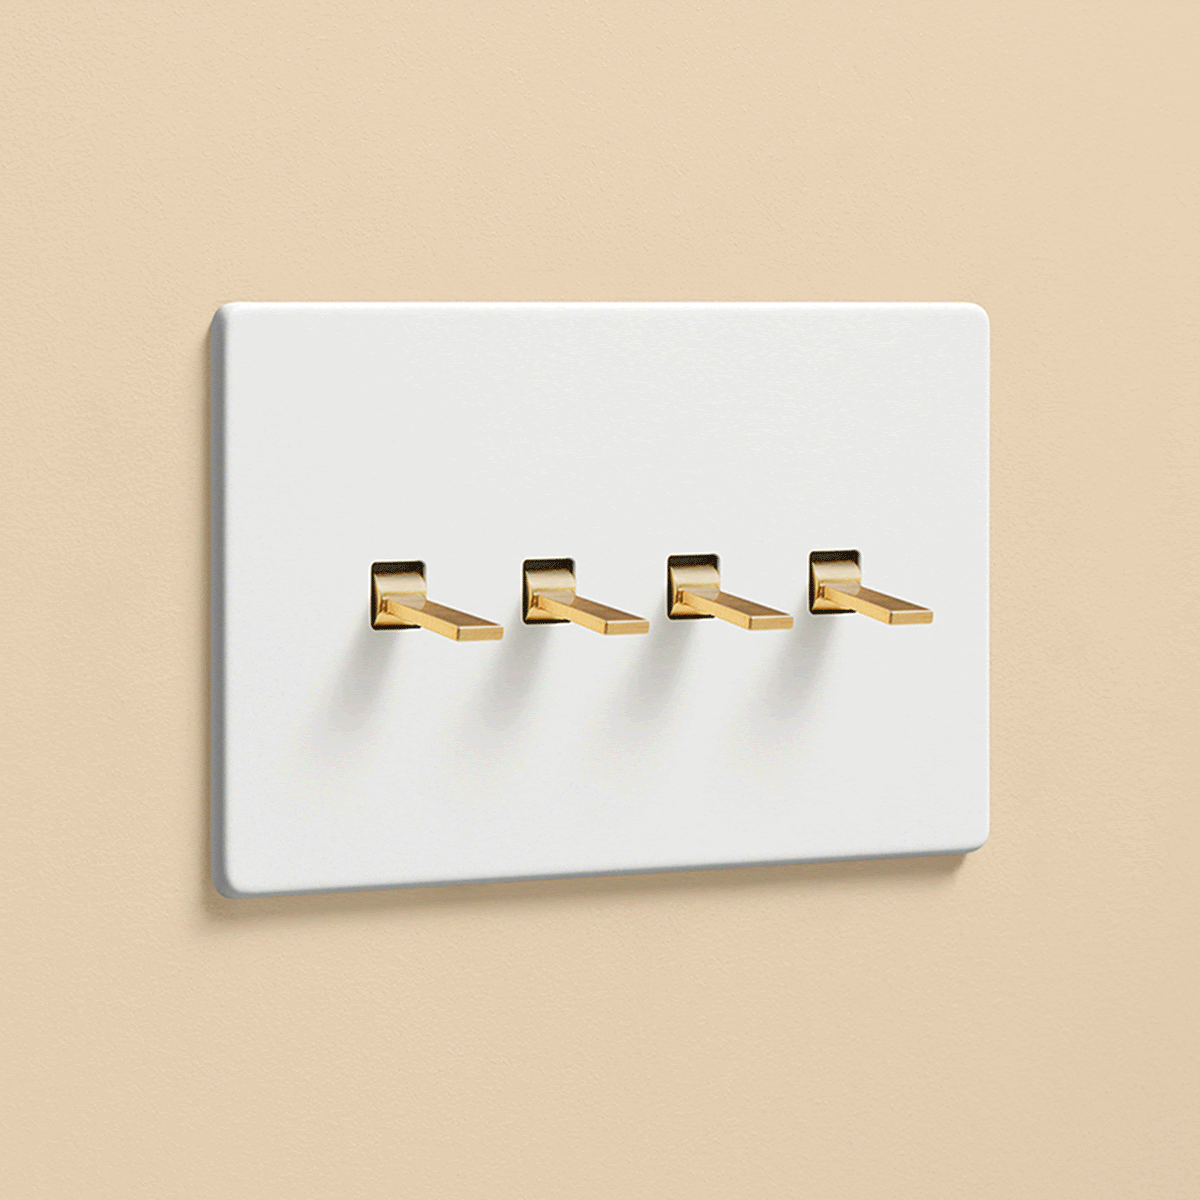 A photo showing a light switch which is made up of a combination of toggle and dimmer switches.